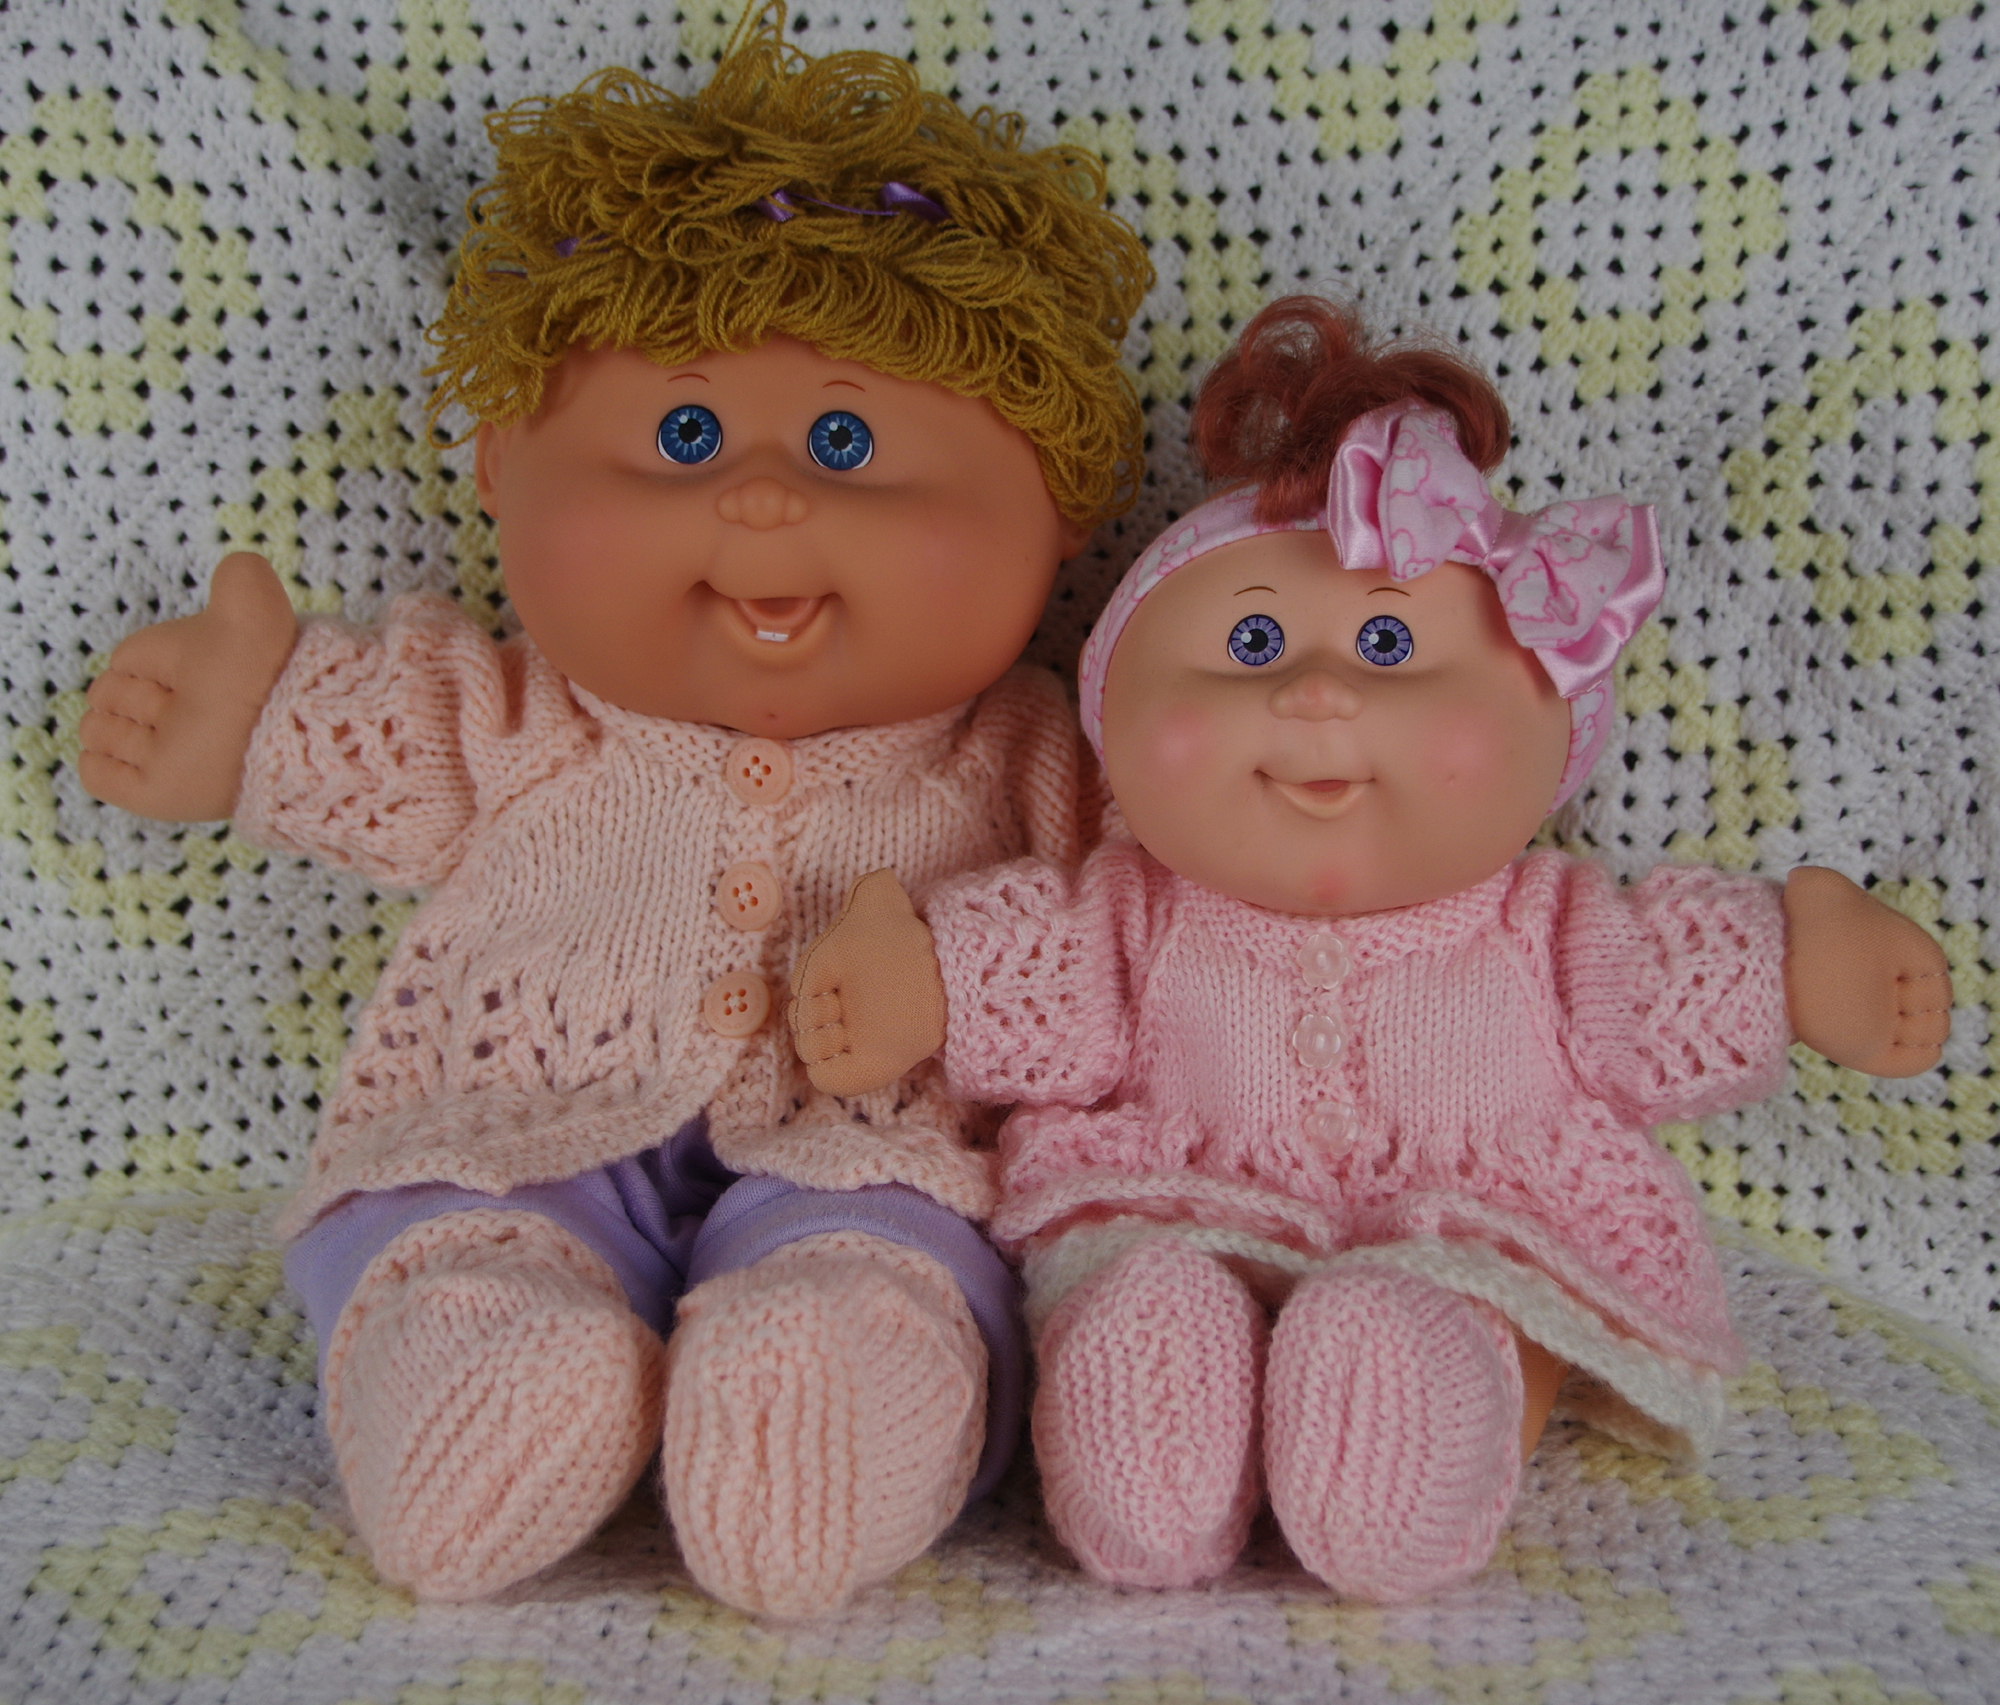 Free Knitting Patterns For 14 Inch Doll Clothes Cabbage Patch Knitting Patterns